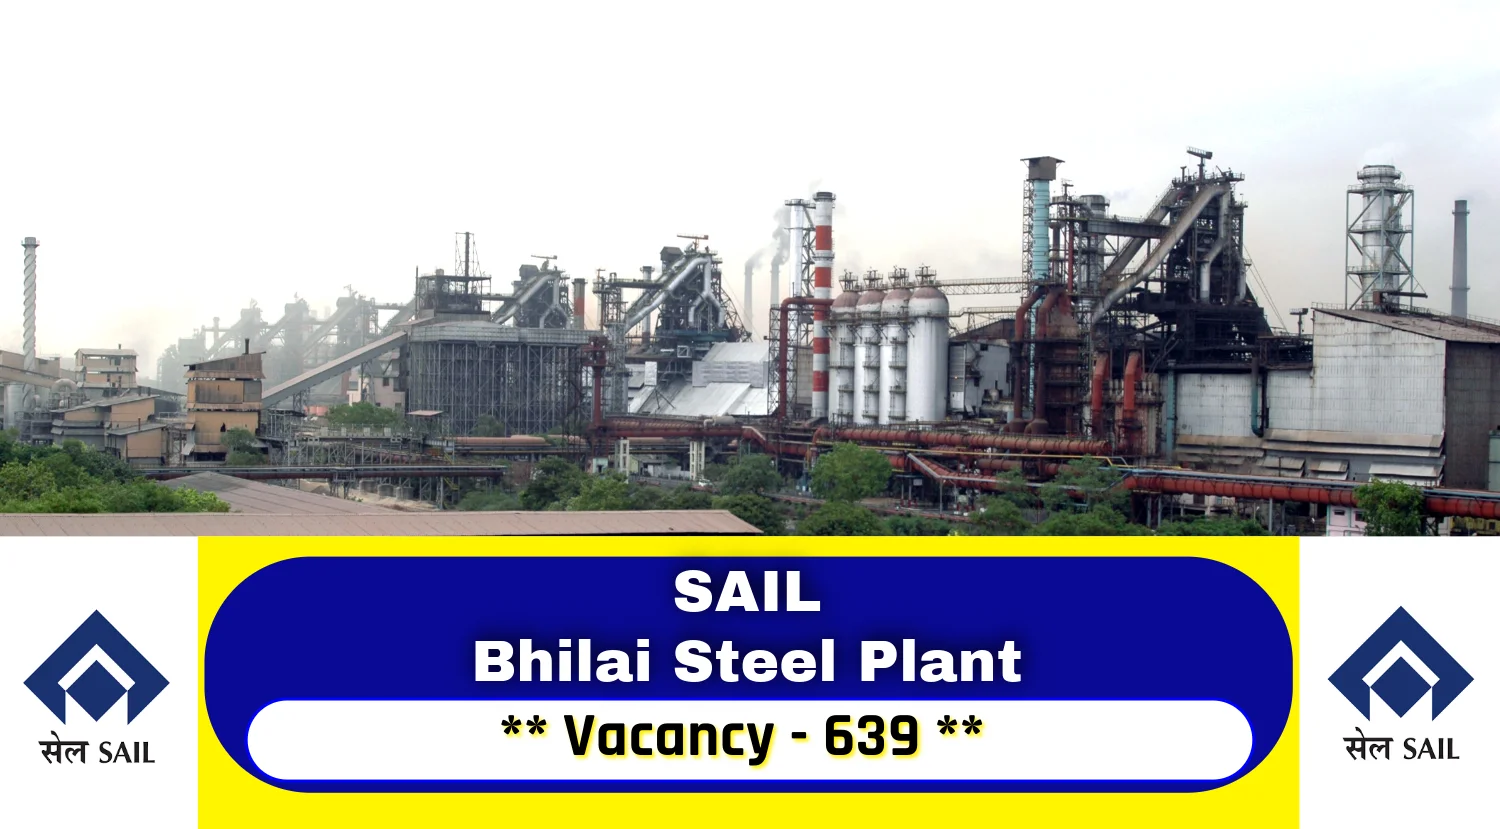 Bhilai Steel Plant, SAIL (SAIL BSP) is inviting applications from eligible candidates for 639 posts of Trade Apprentices.